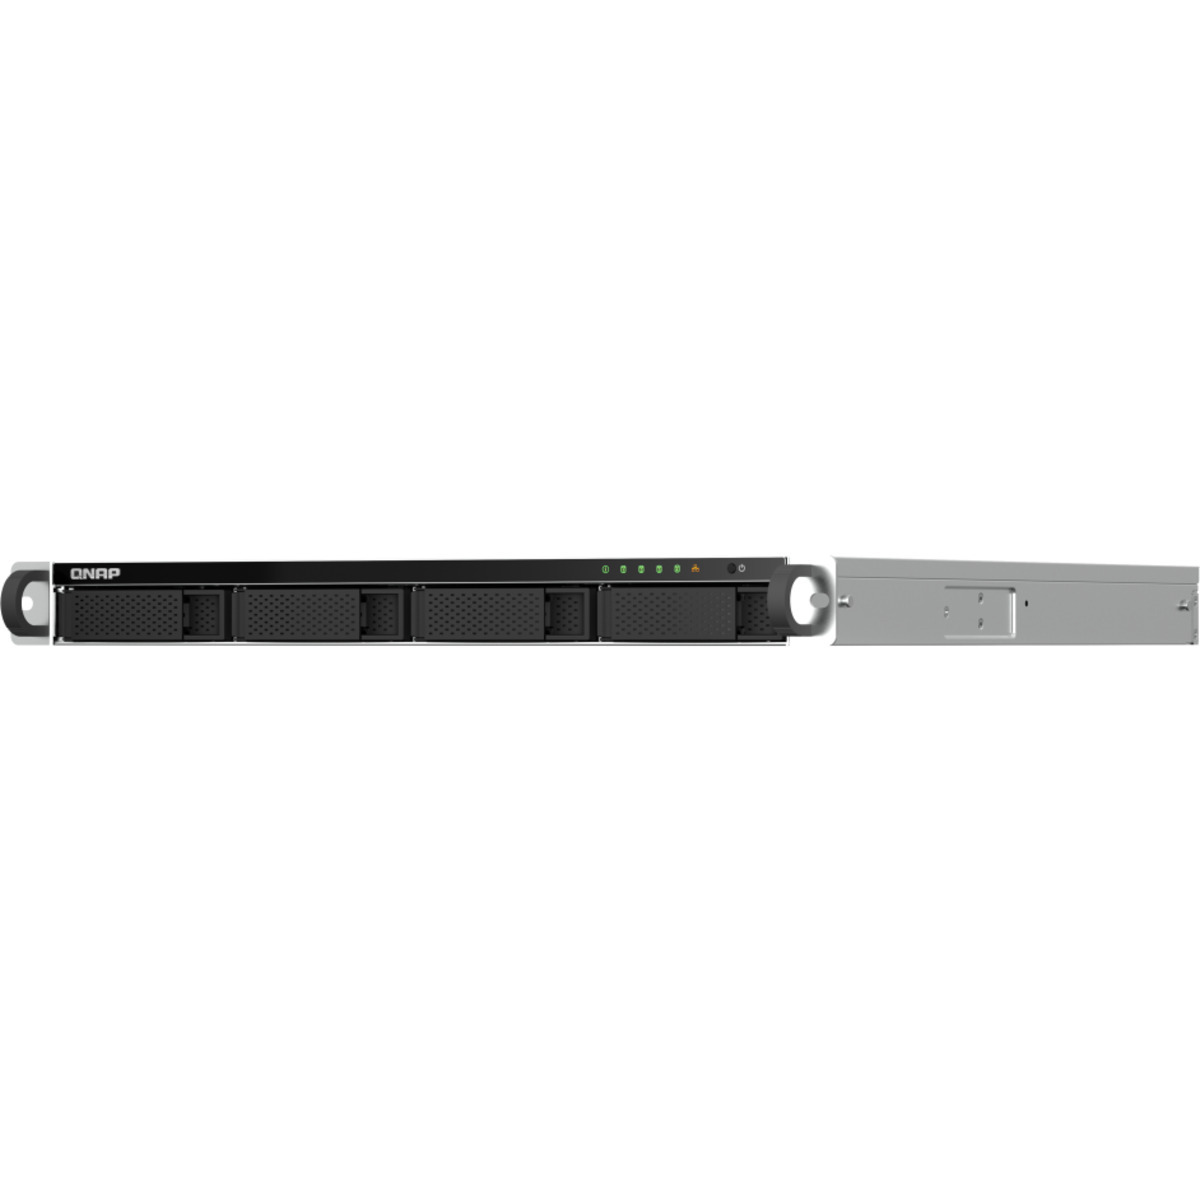 QNAP TS-464U-RP RackMount 4-Bay Multimedia / Power User / Business NAS - Network Attached Storage Device Burn-In Tested Configurations TS-464U-RP